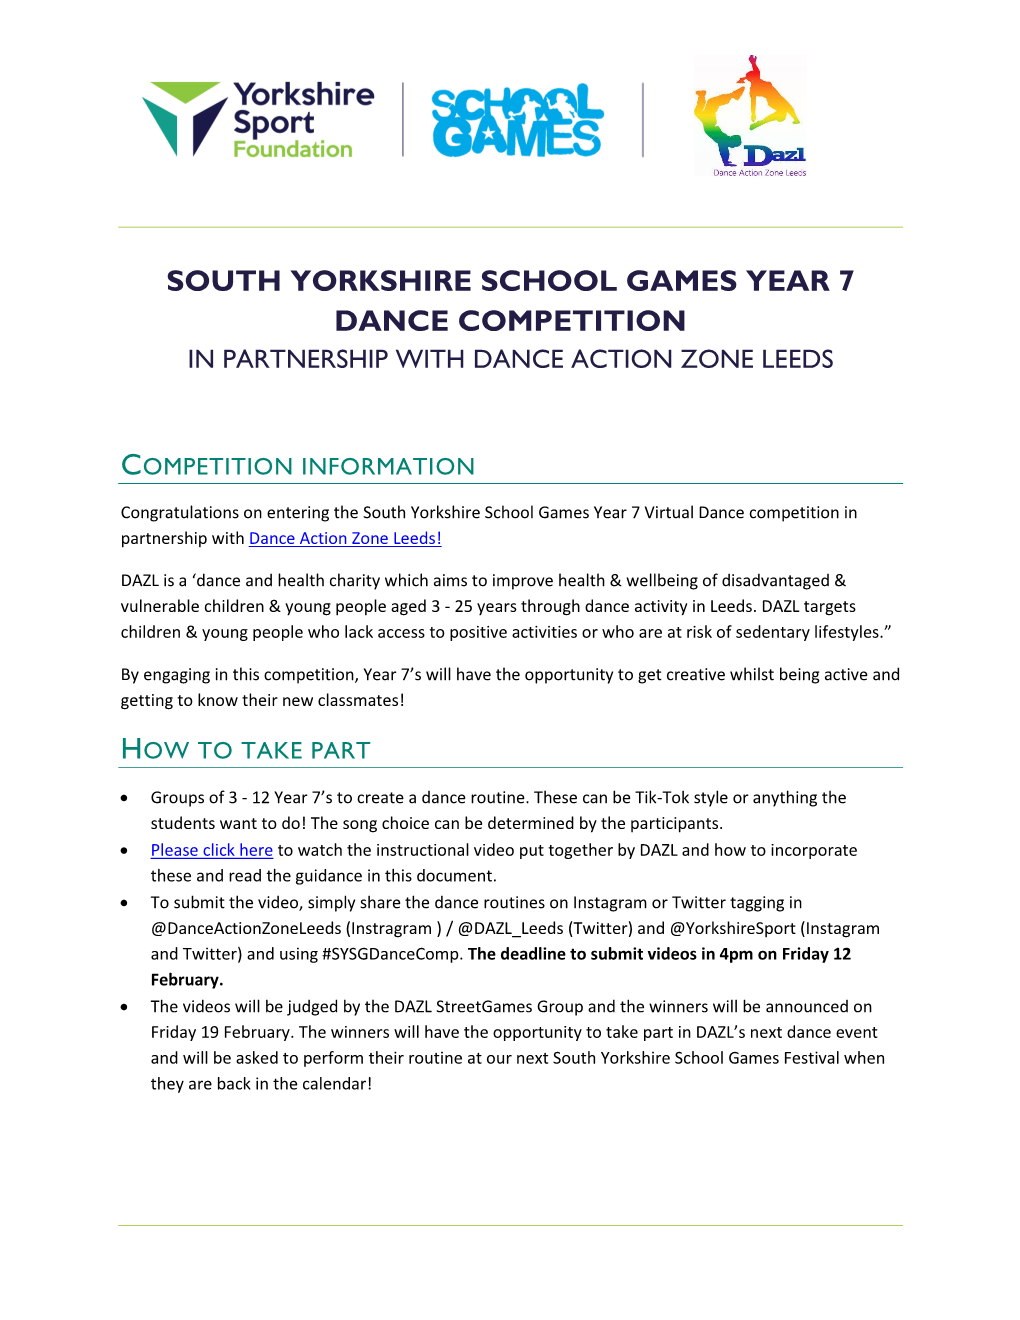 South Yorkshire School Games Year 7 Dance Competition in Partnership with Dance Action Zone Leeds